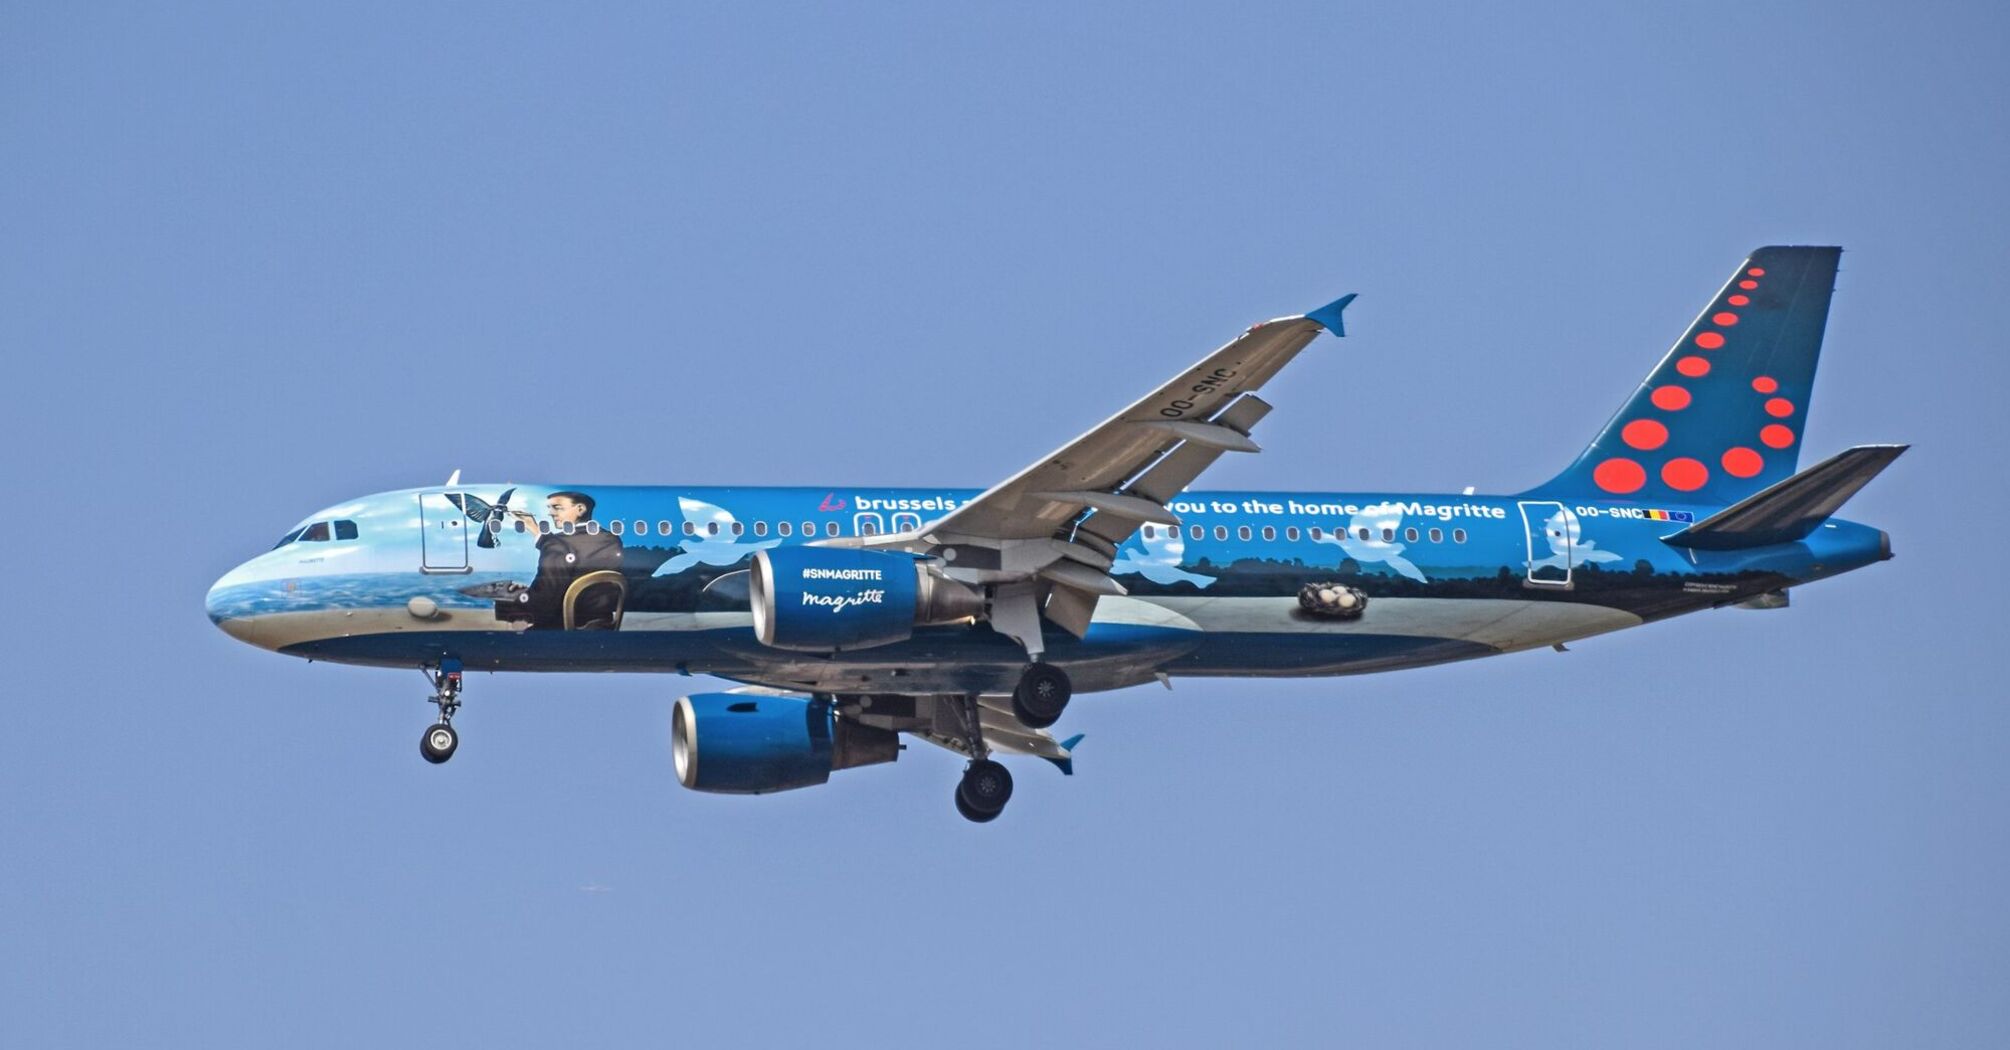 Brussels Airlines plane with special livery in flight